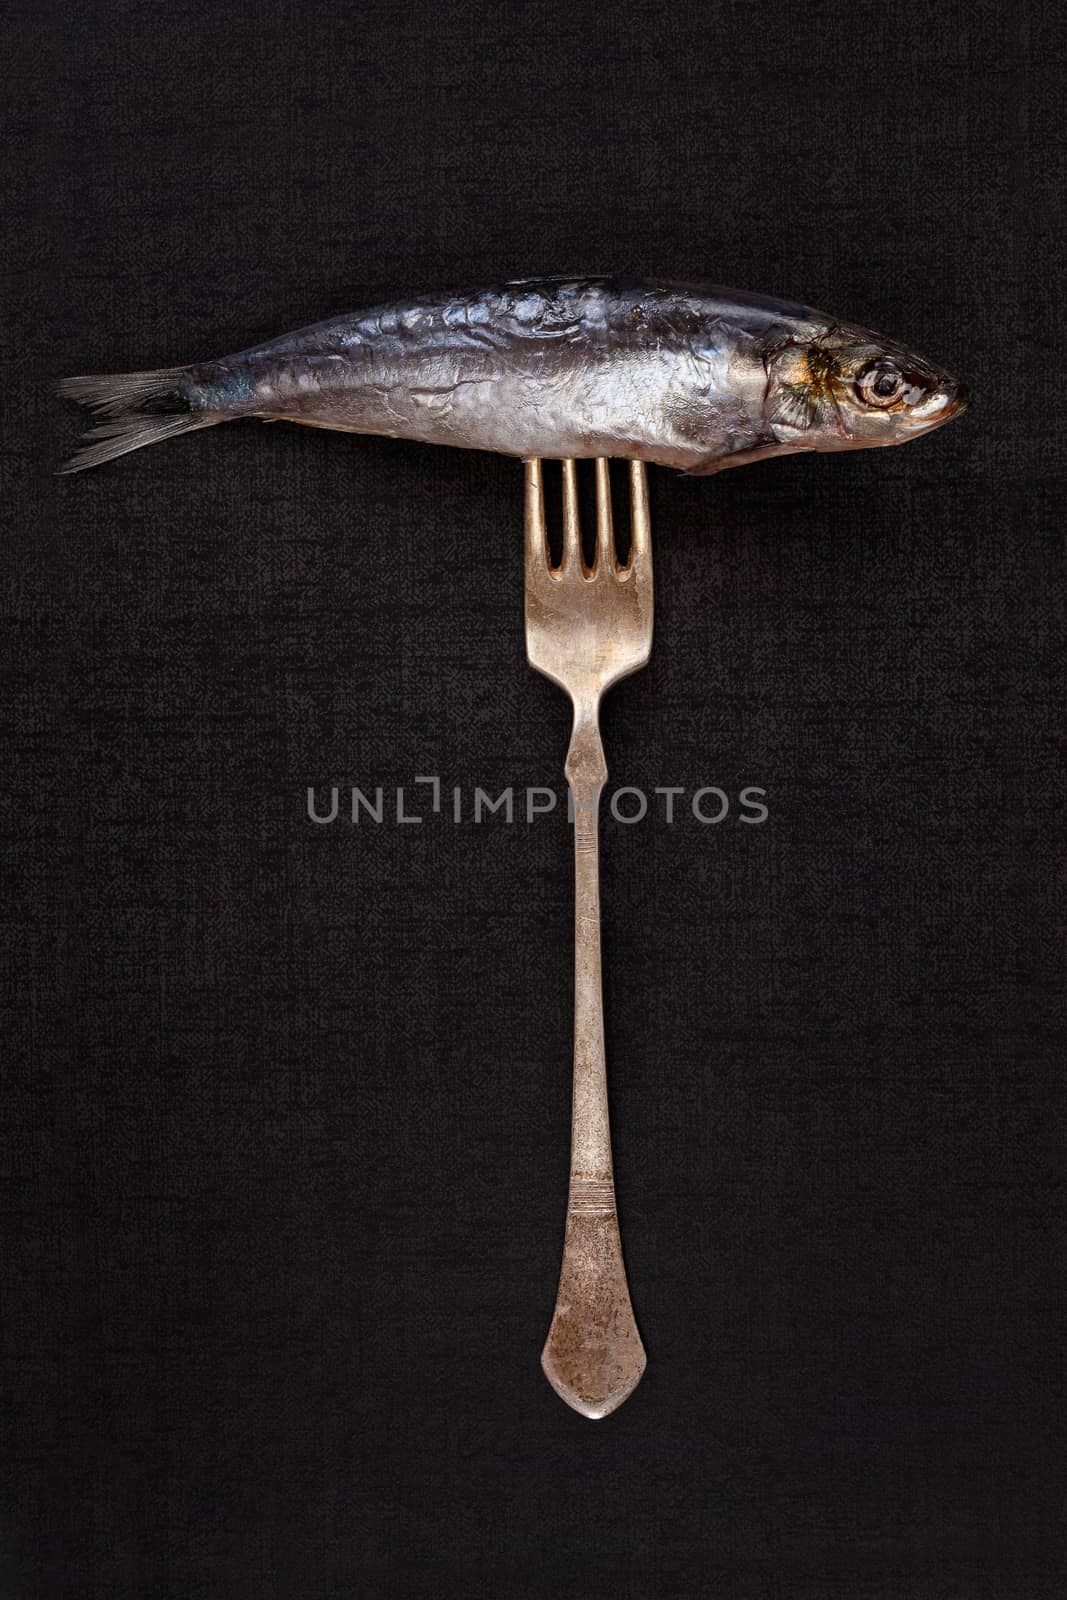 Fresh sardine fish on silver fork isolated on black background. Culinary seafood eating. 